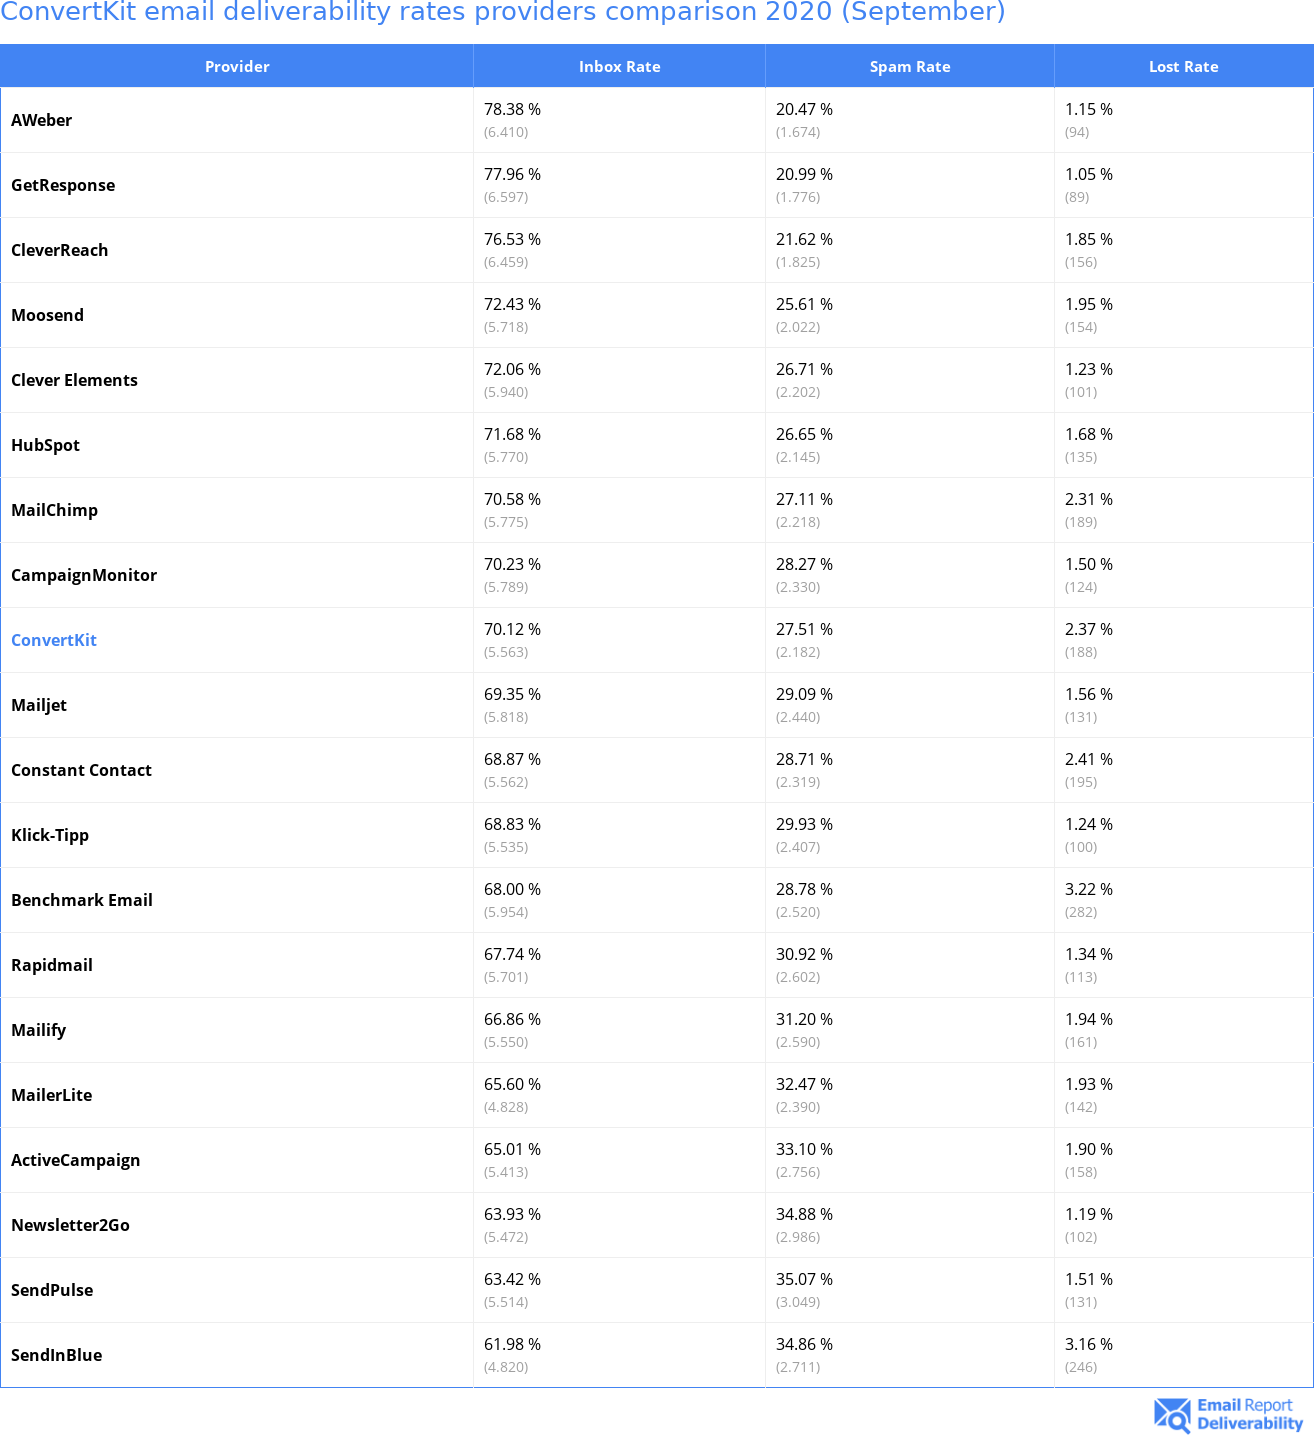 ConvertKit email deliverability rates providers comparison 2020 (September)